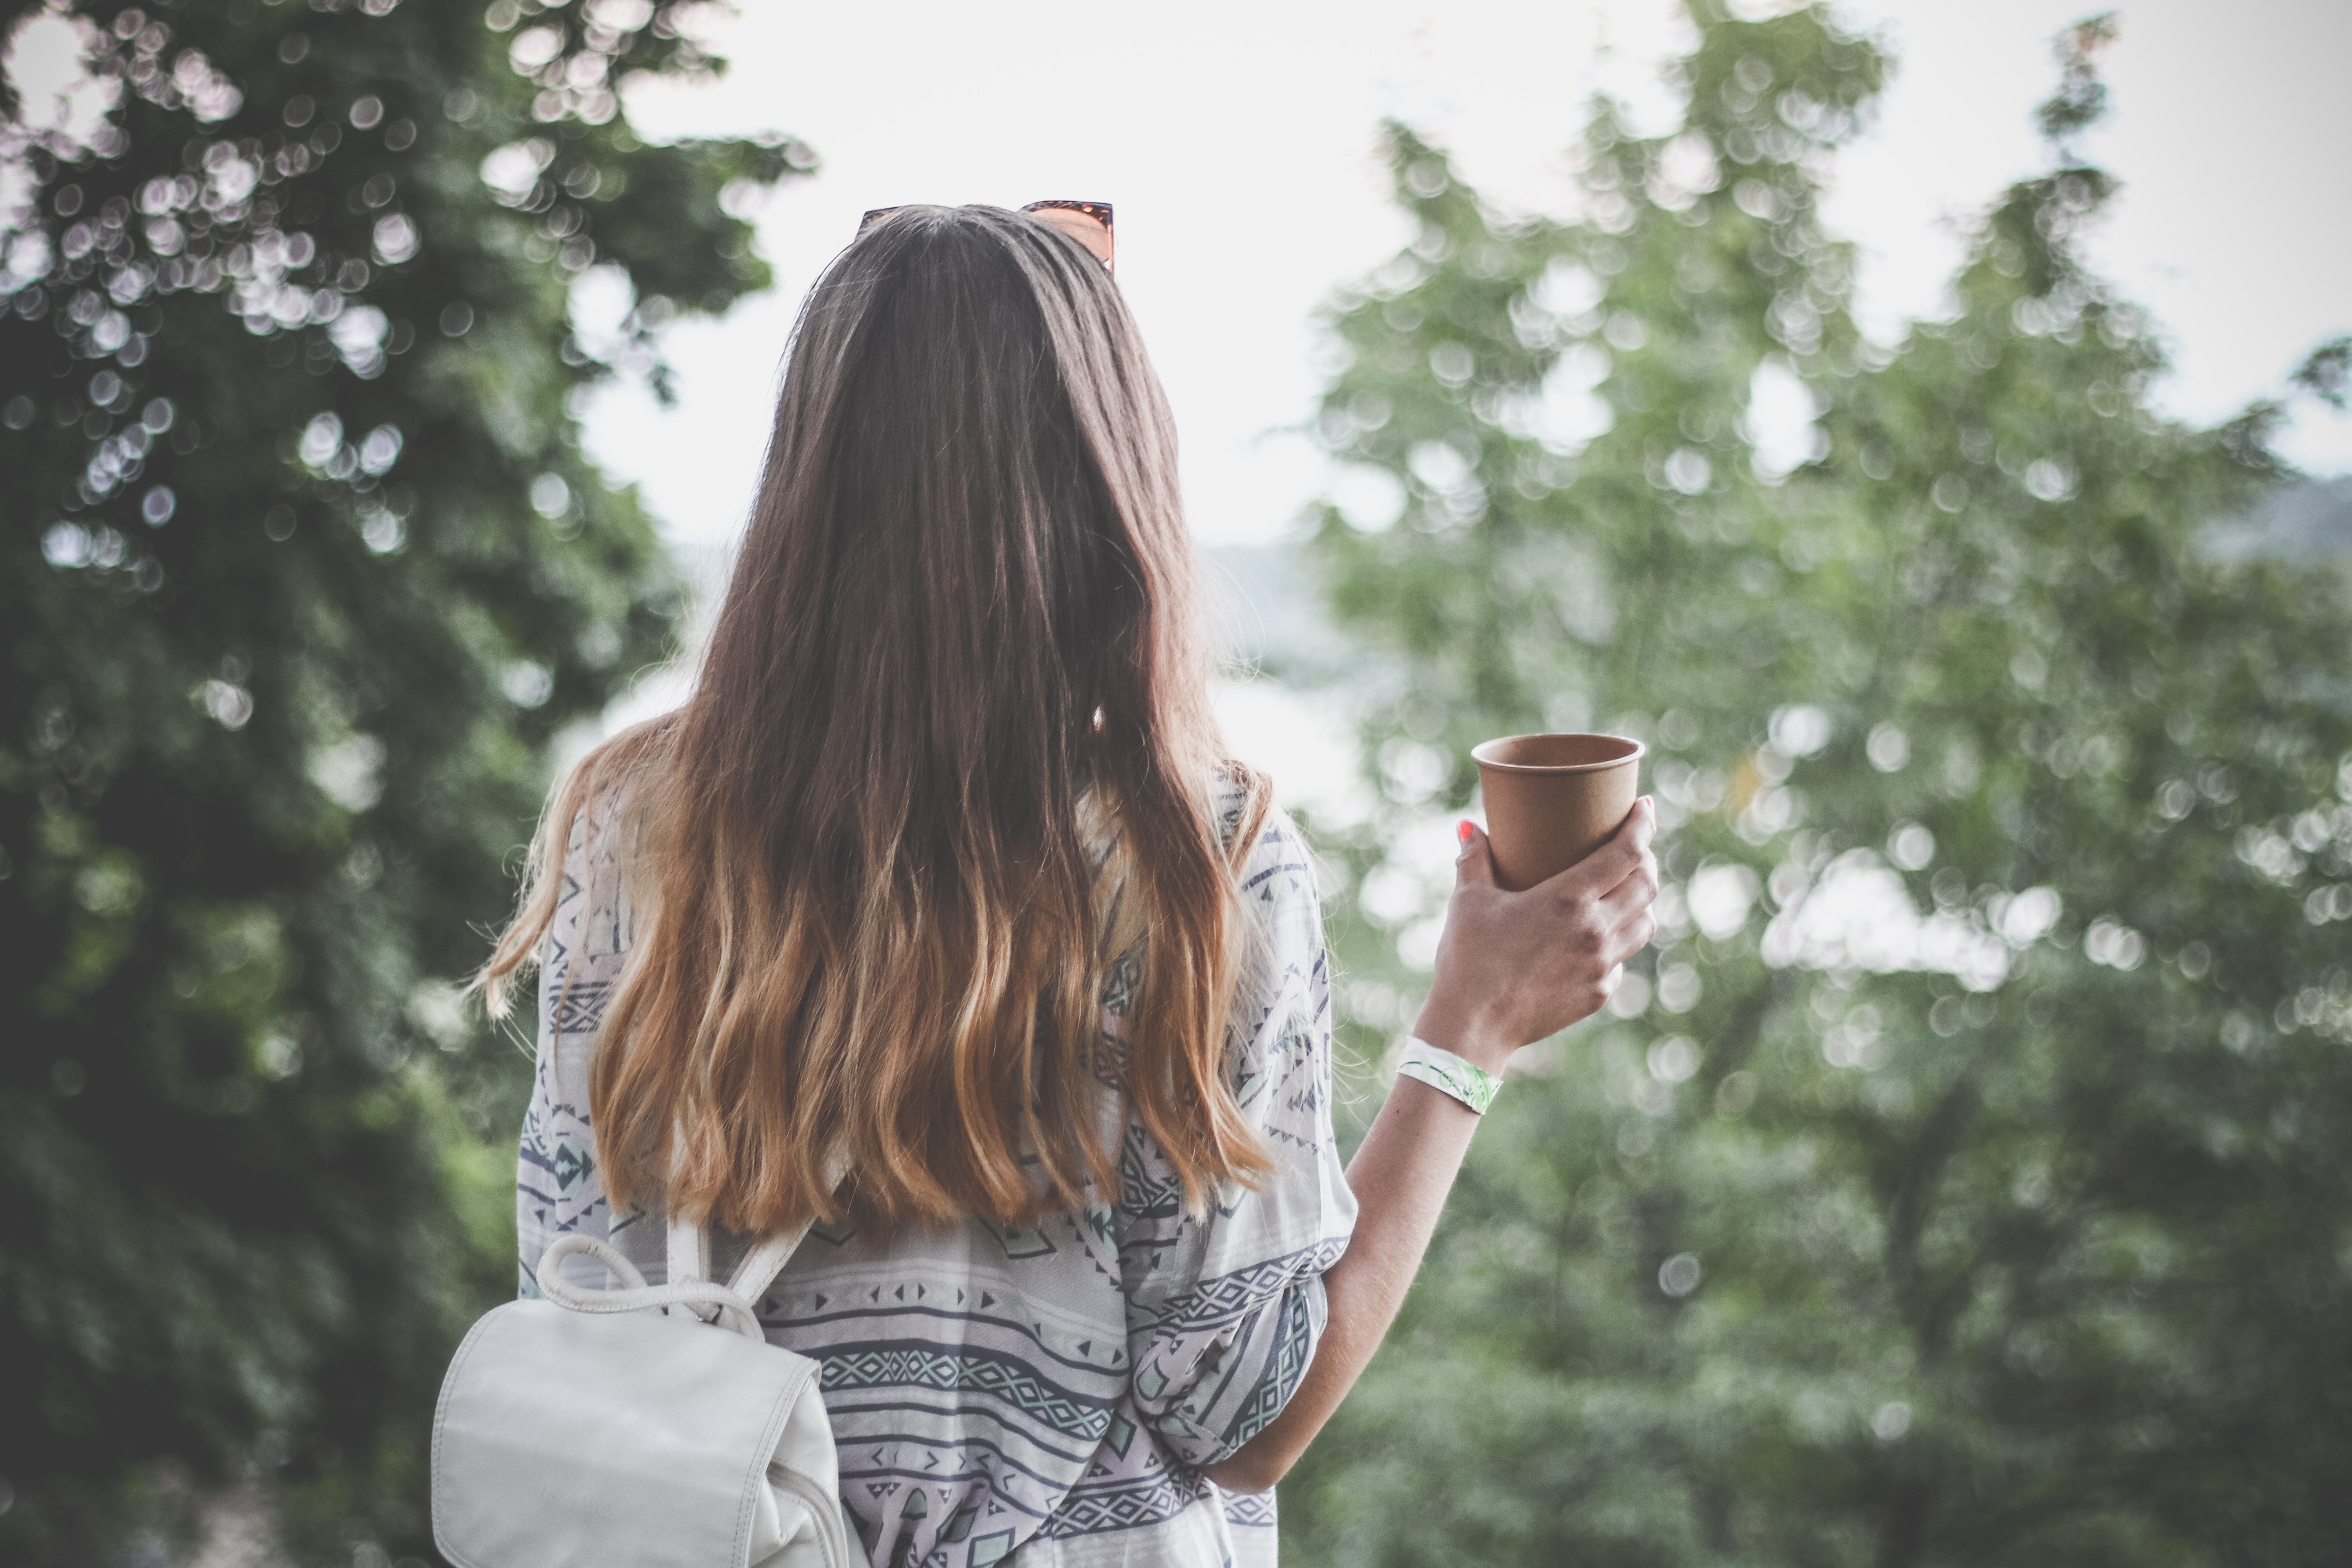 A woman standing, her back facing the camera, holding a cup looking out at trees and nature. Woman represents the use of christian mindfulness.